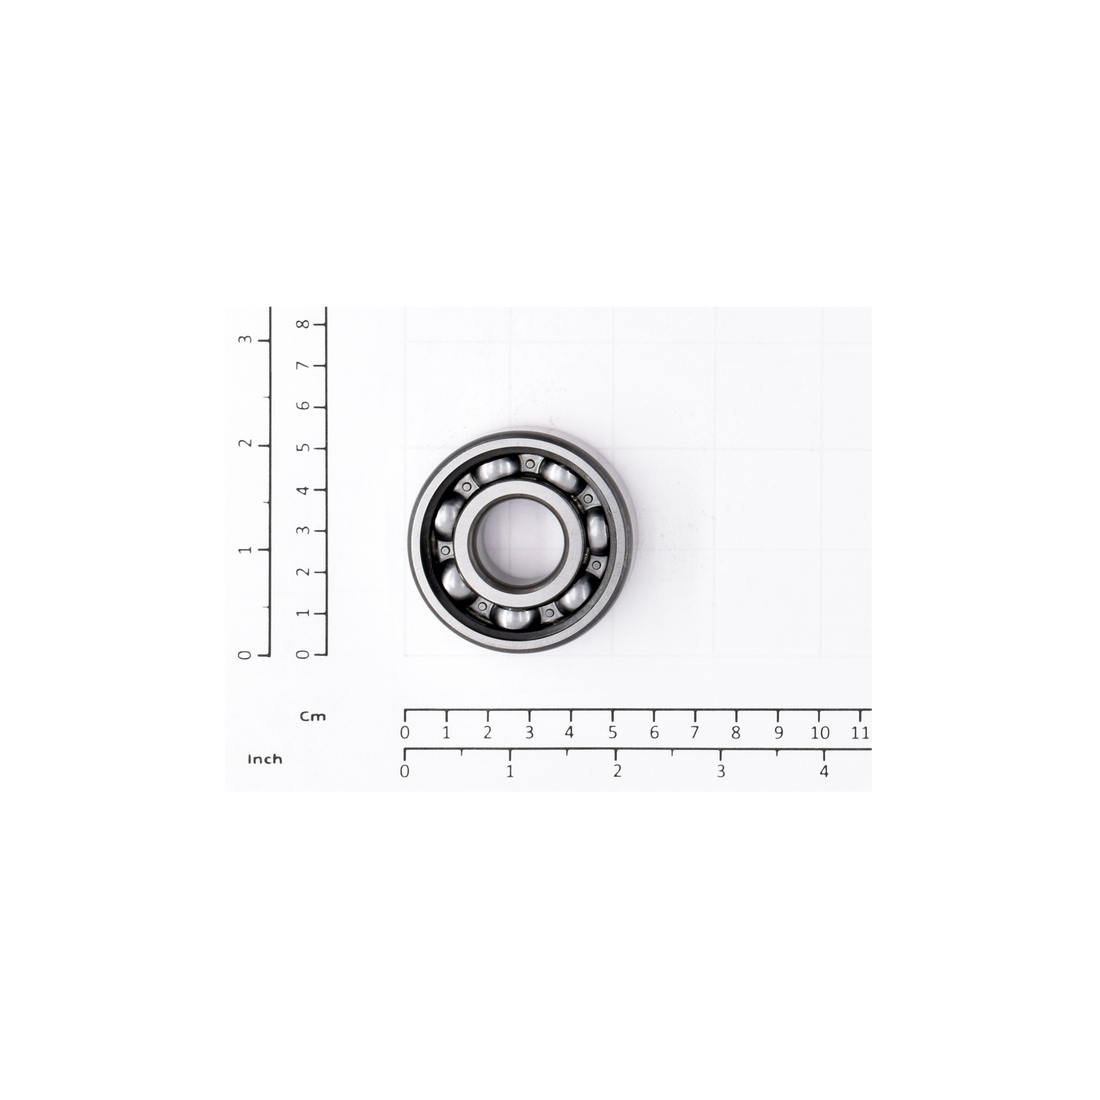 R&M Parts - Deep Groove Ball Bearing, Part Number: 52001018